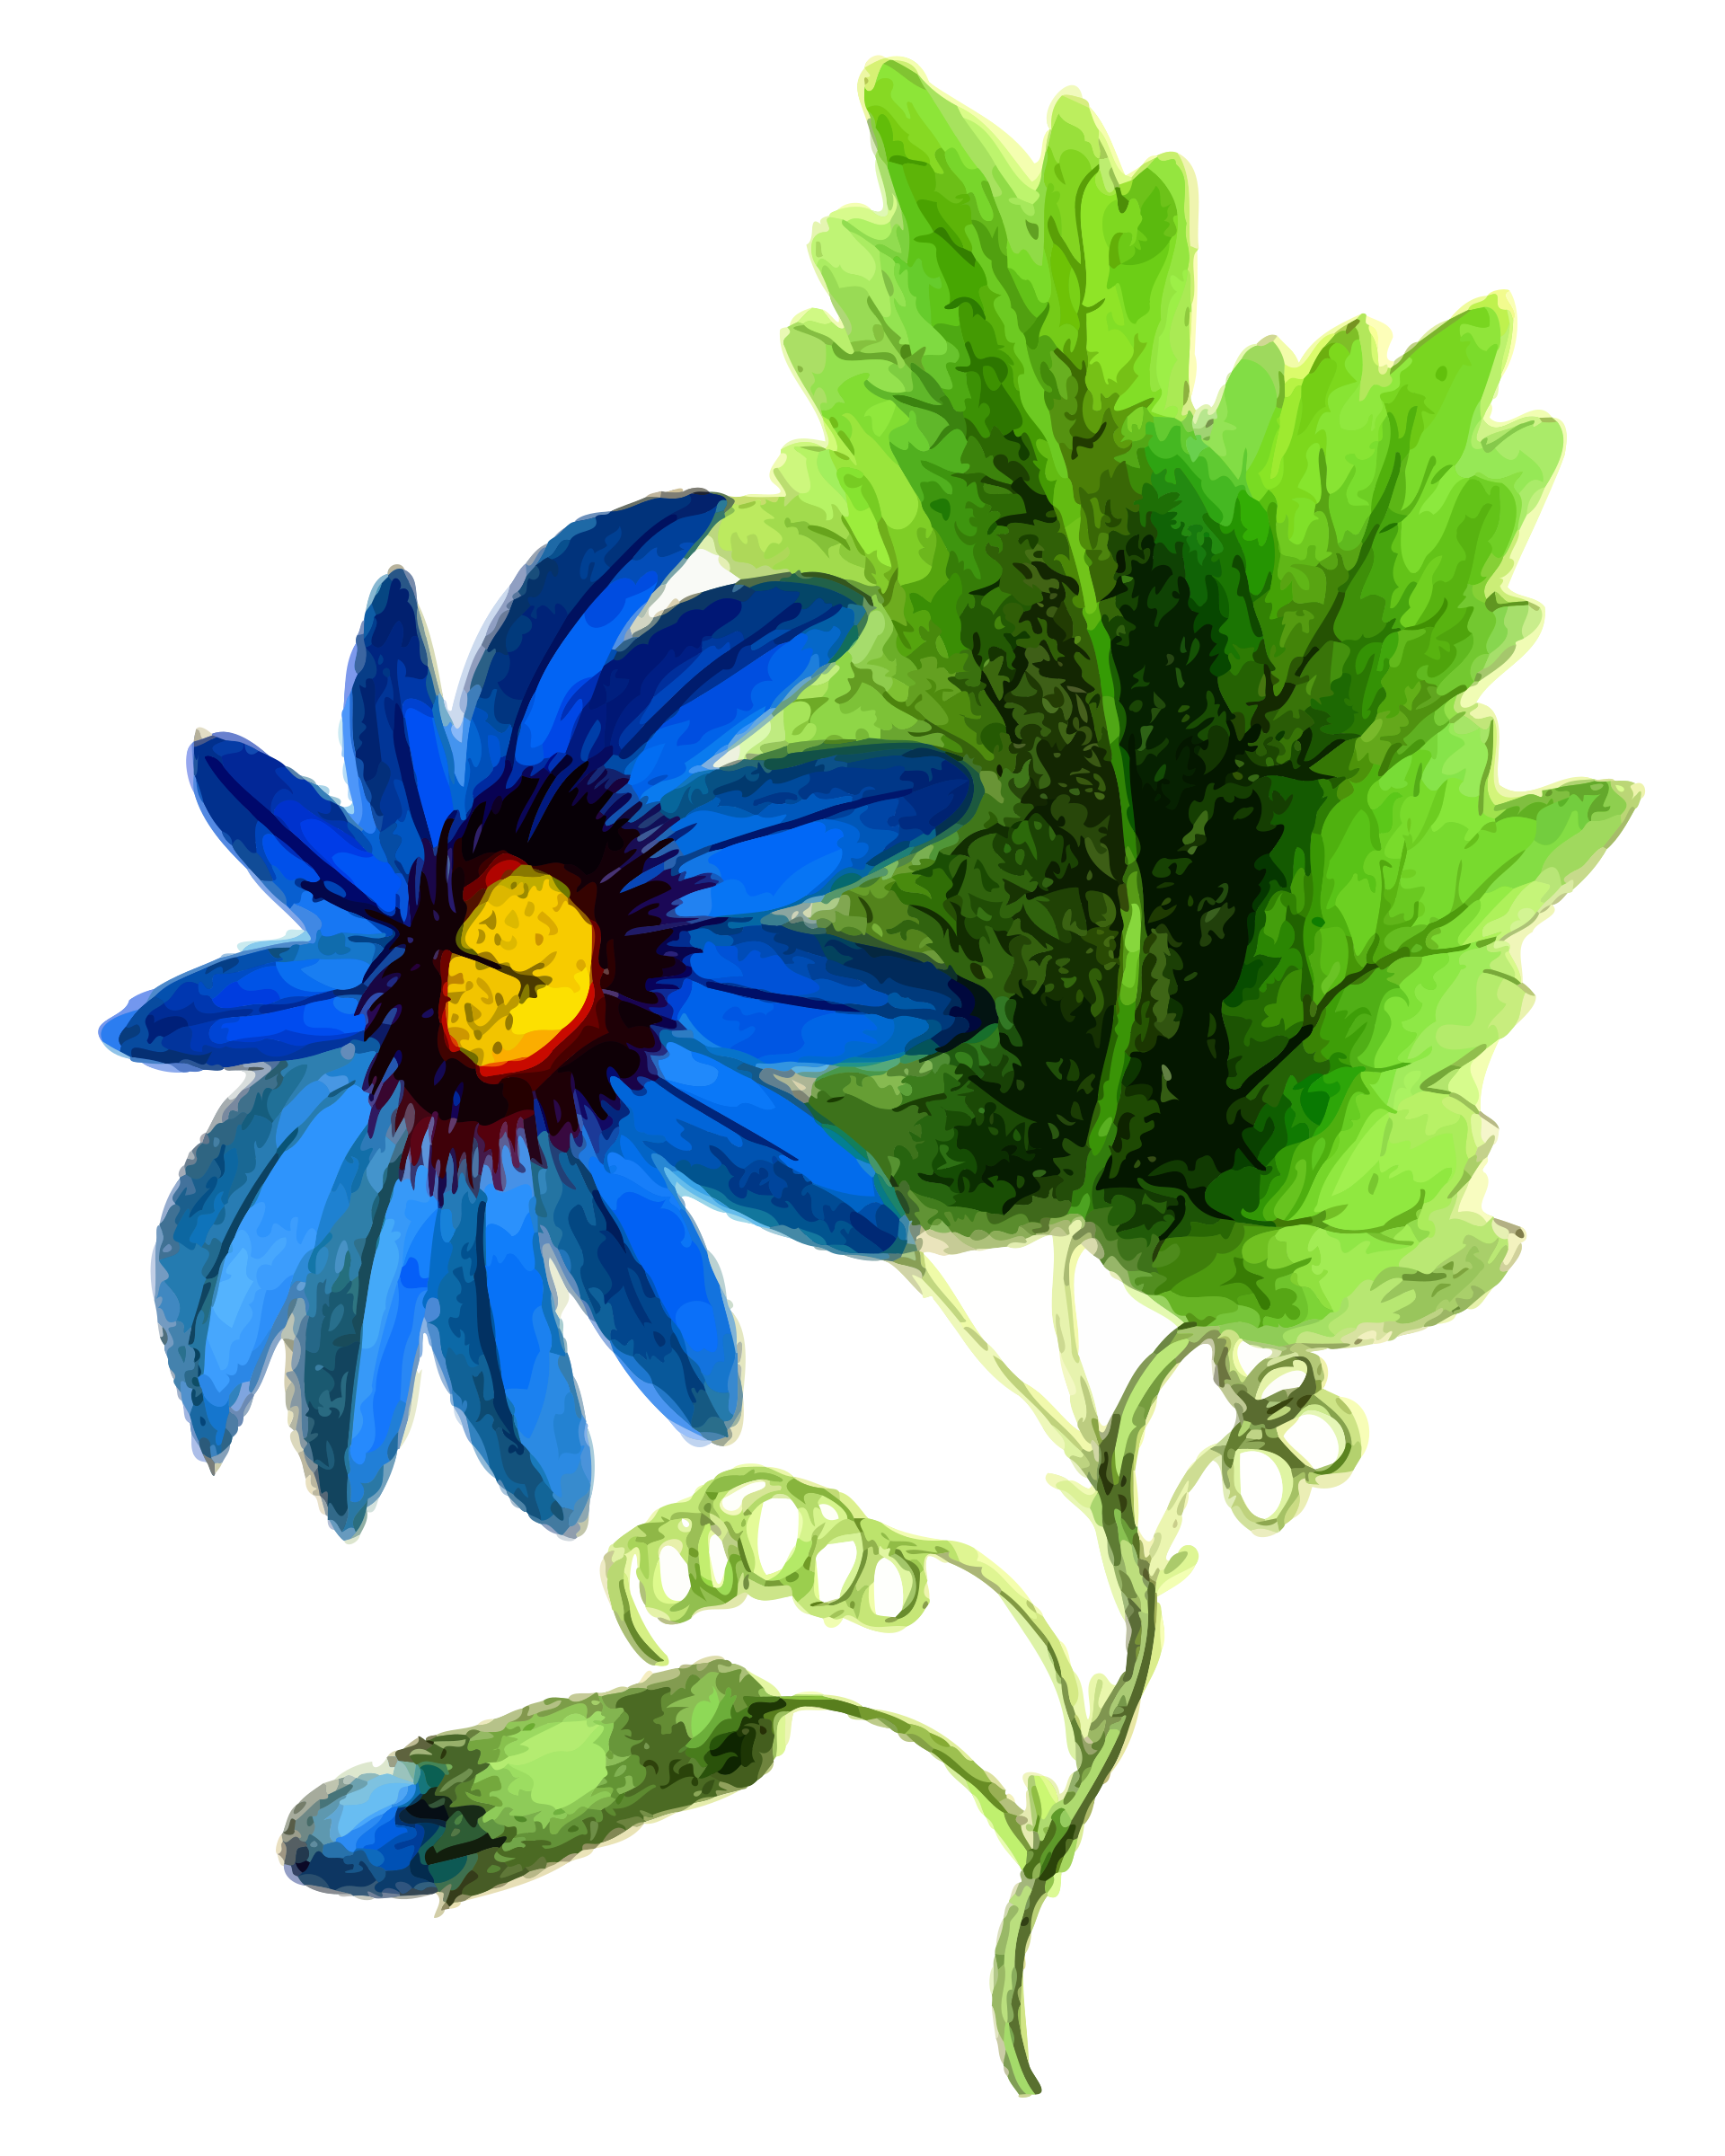 Blue Flower Vector  Clipart image Free stock photo 